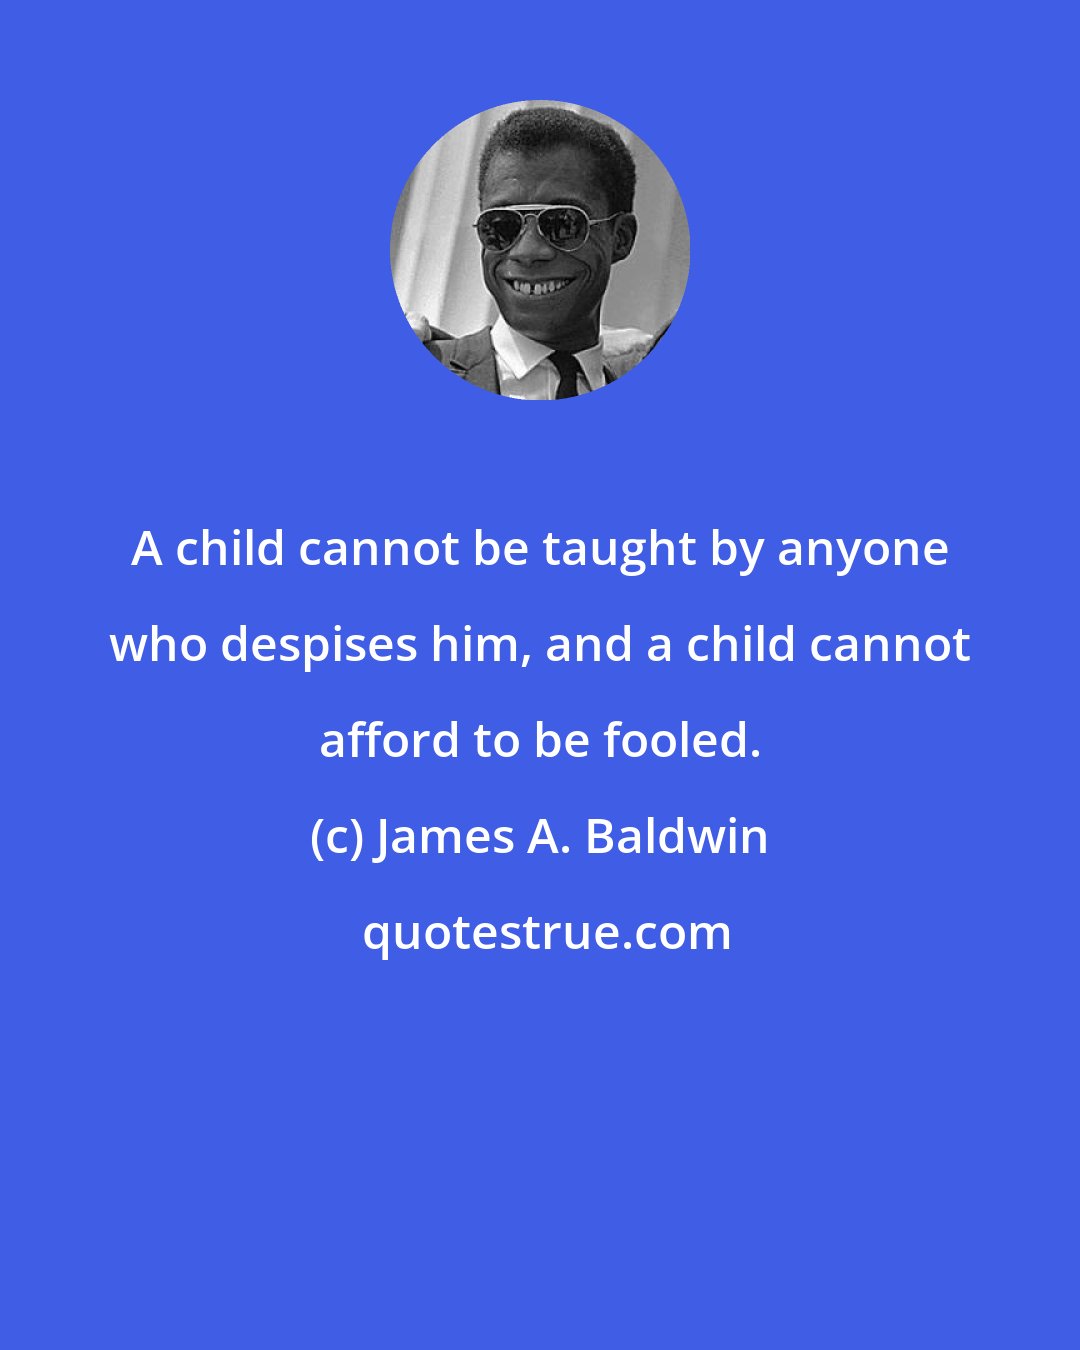 James A. Baldwin: A child cannot be taught by anyone who despises him, and a child cannot afford to be fooled.